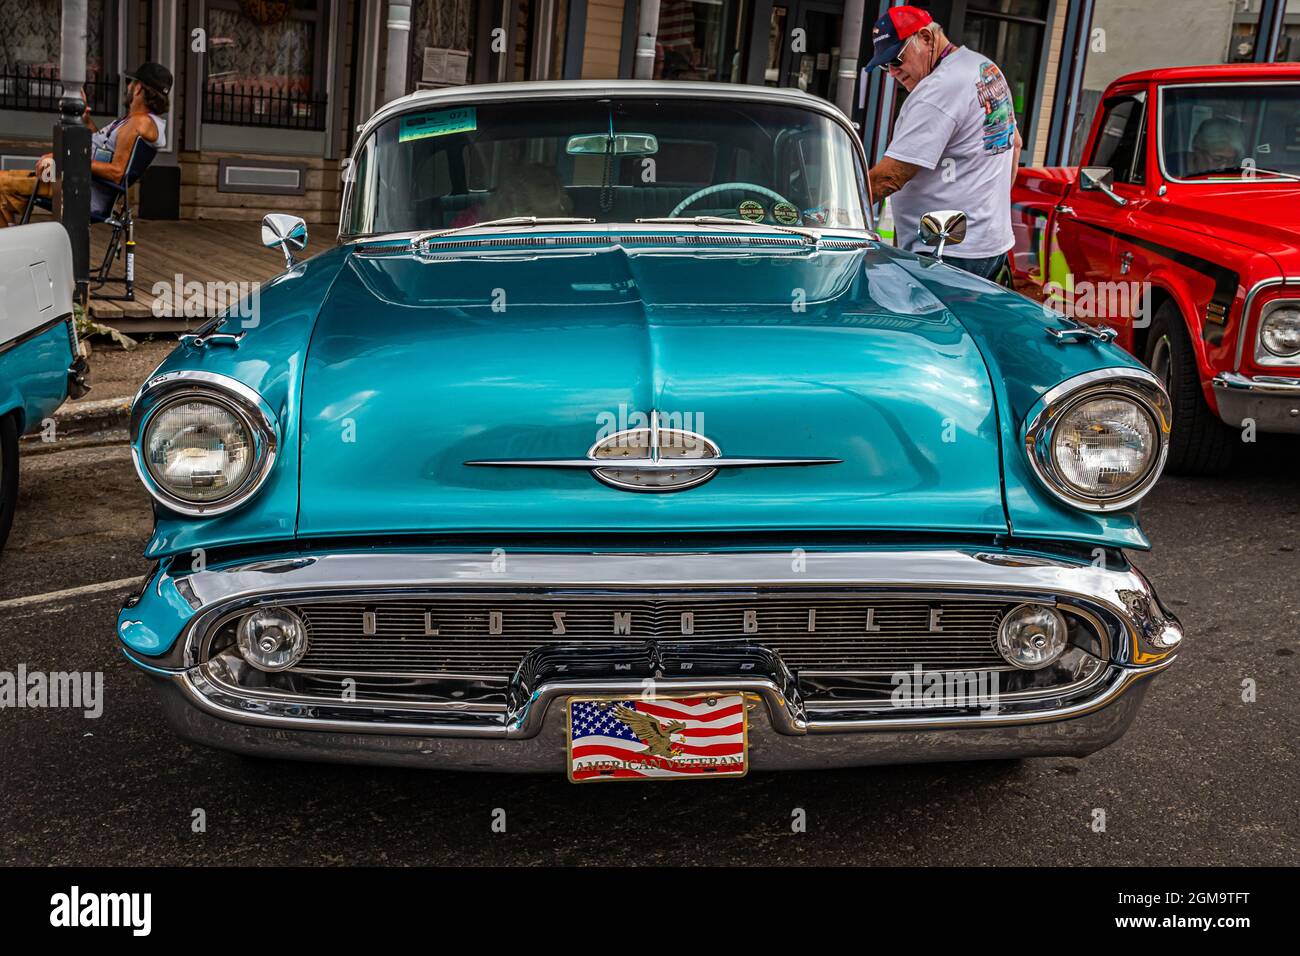 Virginia City, NV - July 30, 2021: 1957 Oldsmobile Golden Rocket 88 Hardtop Coupe at a local car show. Stock Photo